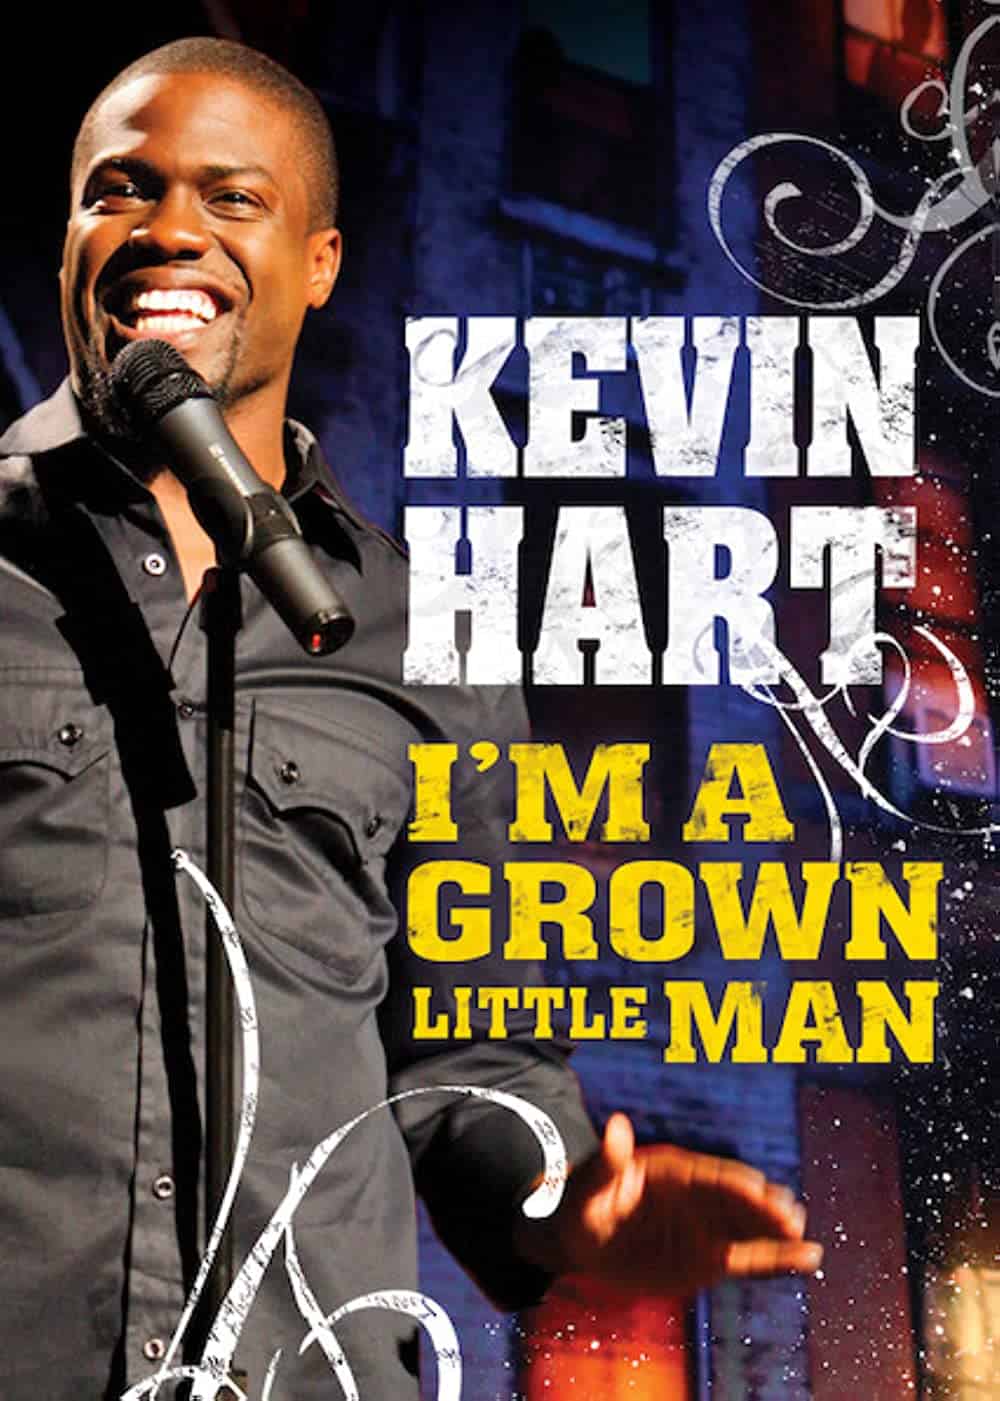 Kevin Hart I'm a Grown Little Man (2009) Best Kevin Hart Movies (Ranked)